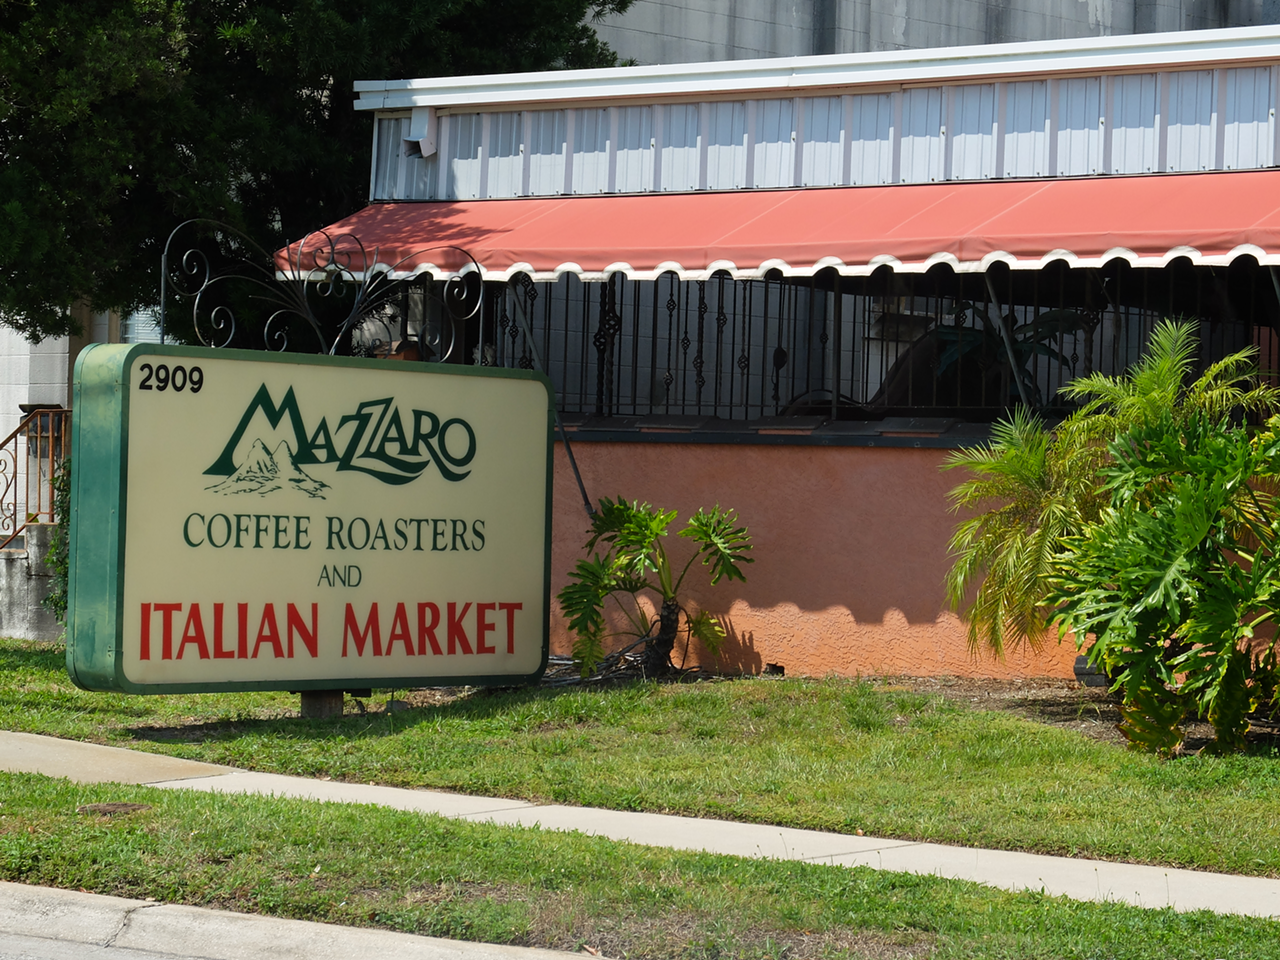 9. Mazzaro’s Italian Market
2909 22nd Ave N, St. Petersburg, 727-321-2400
“As soon as I walked in I was mesmerized by the amplitude of culinary delights. Not a place you can stop into quickly and in my opinion, better than a full day pass at any amusement park. I feel it may be impossible to shop for one meal or just a quick lunch here. We ate, we enjoyed wine and stocked up on deli meats, cheeses, wine and breads. If you are ever in the St. Petersburg area "get yo booty in here!" You will be glad you did!” -Steven O.